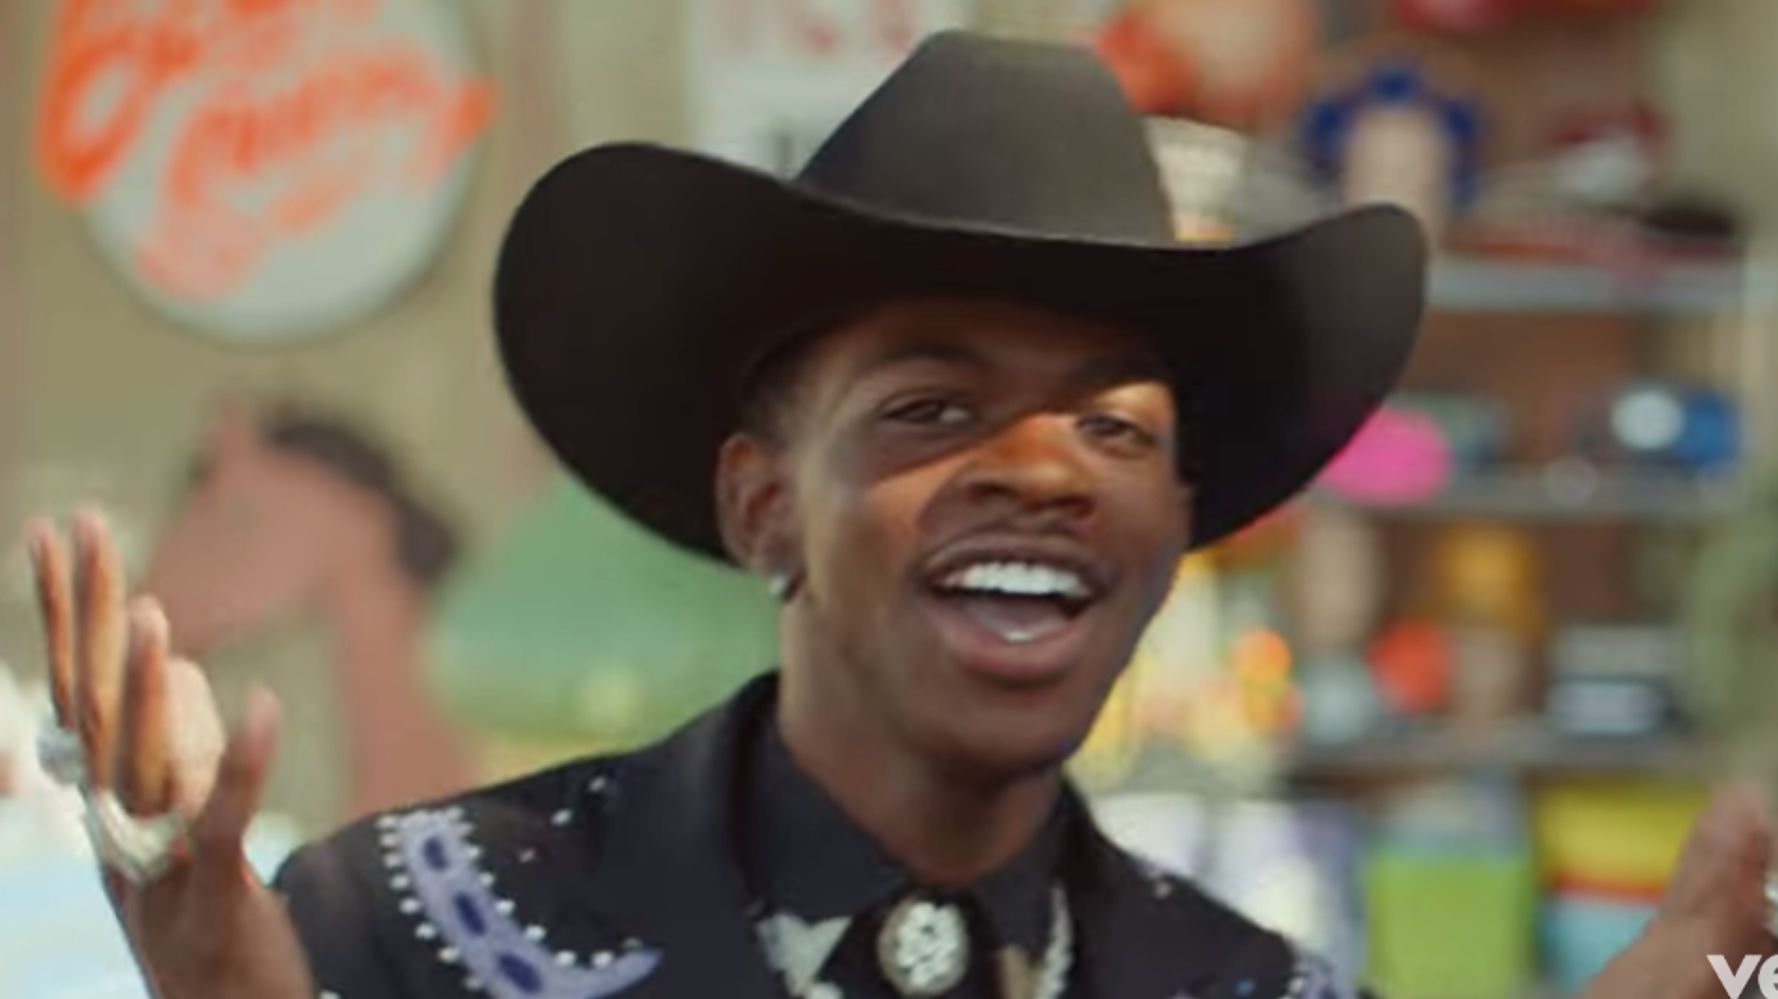 Billy cyrus old town. Lil nas x old Town Road. Old Town Road Lil nas x feat Billy ray. Ft. Billy ray Cyrus.